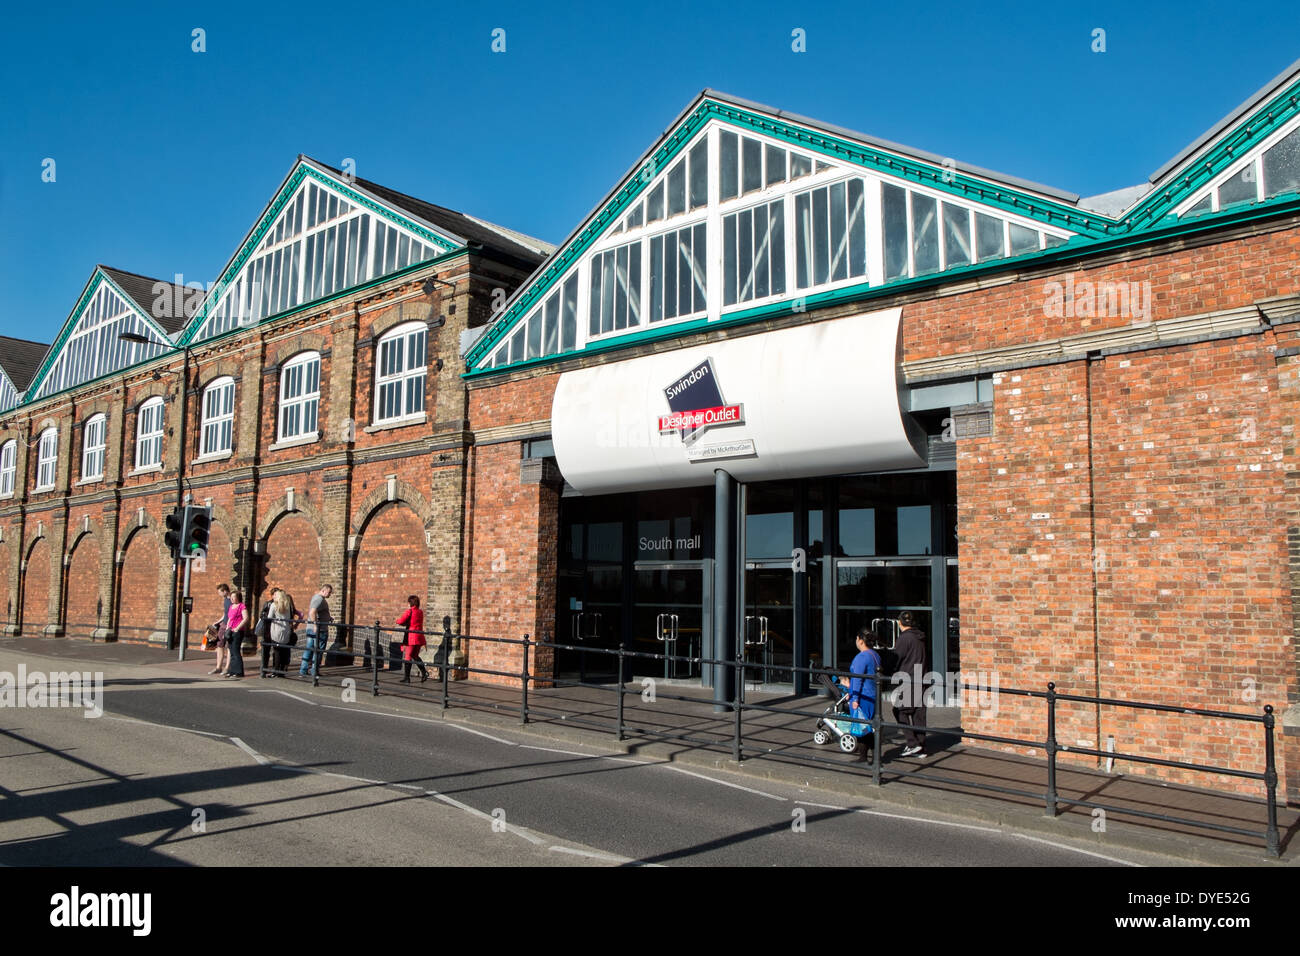 Outlet Village High Resolution Stock Photography and Images - Alamy